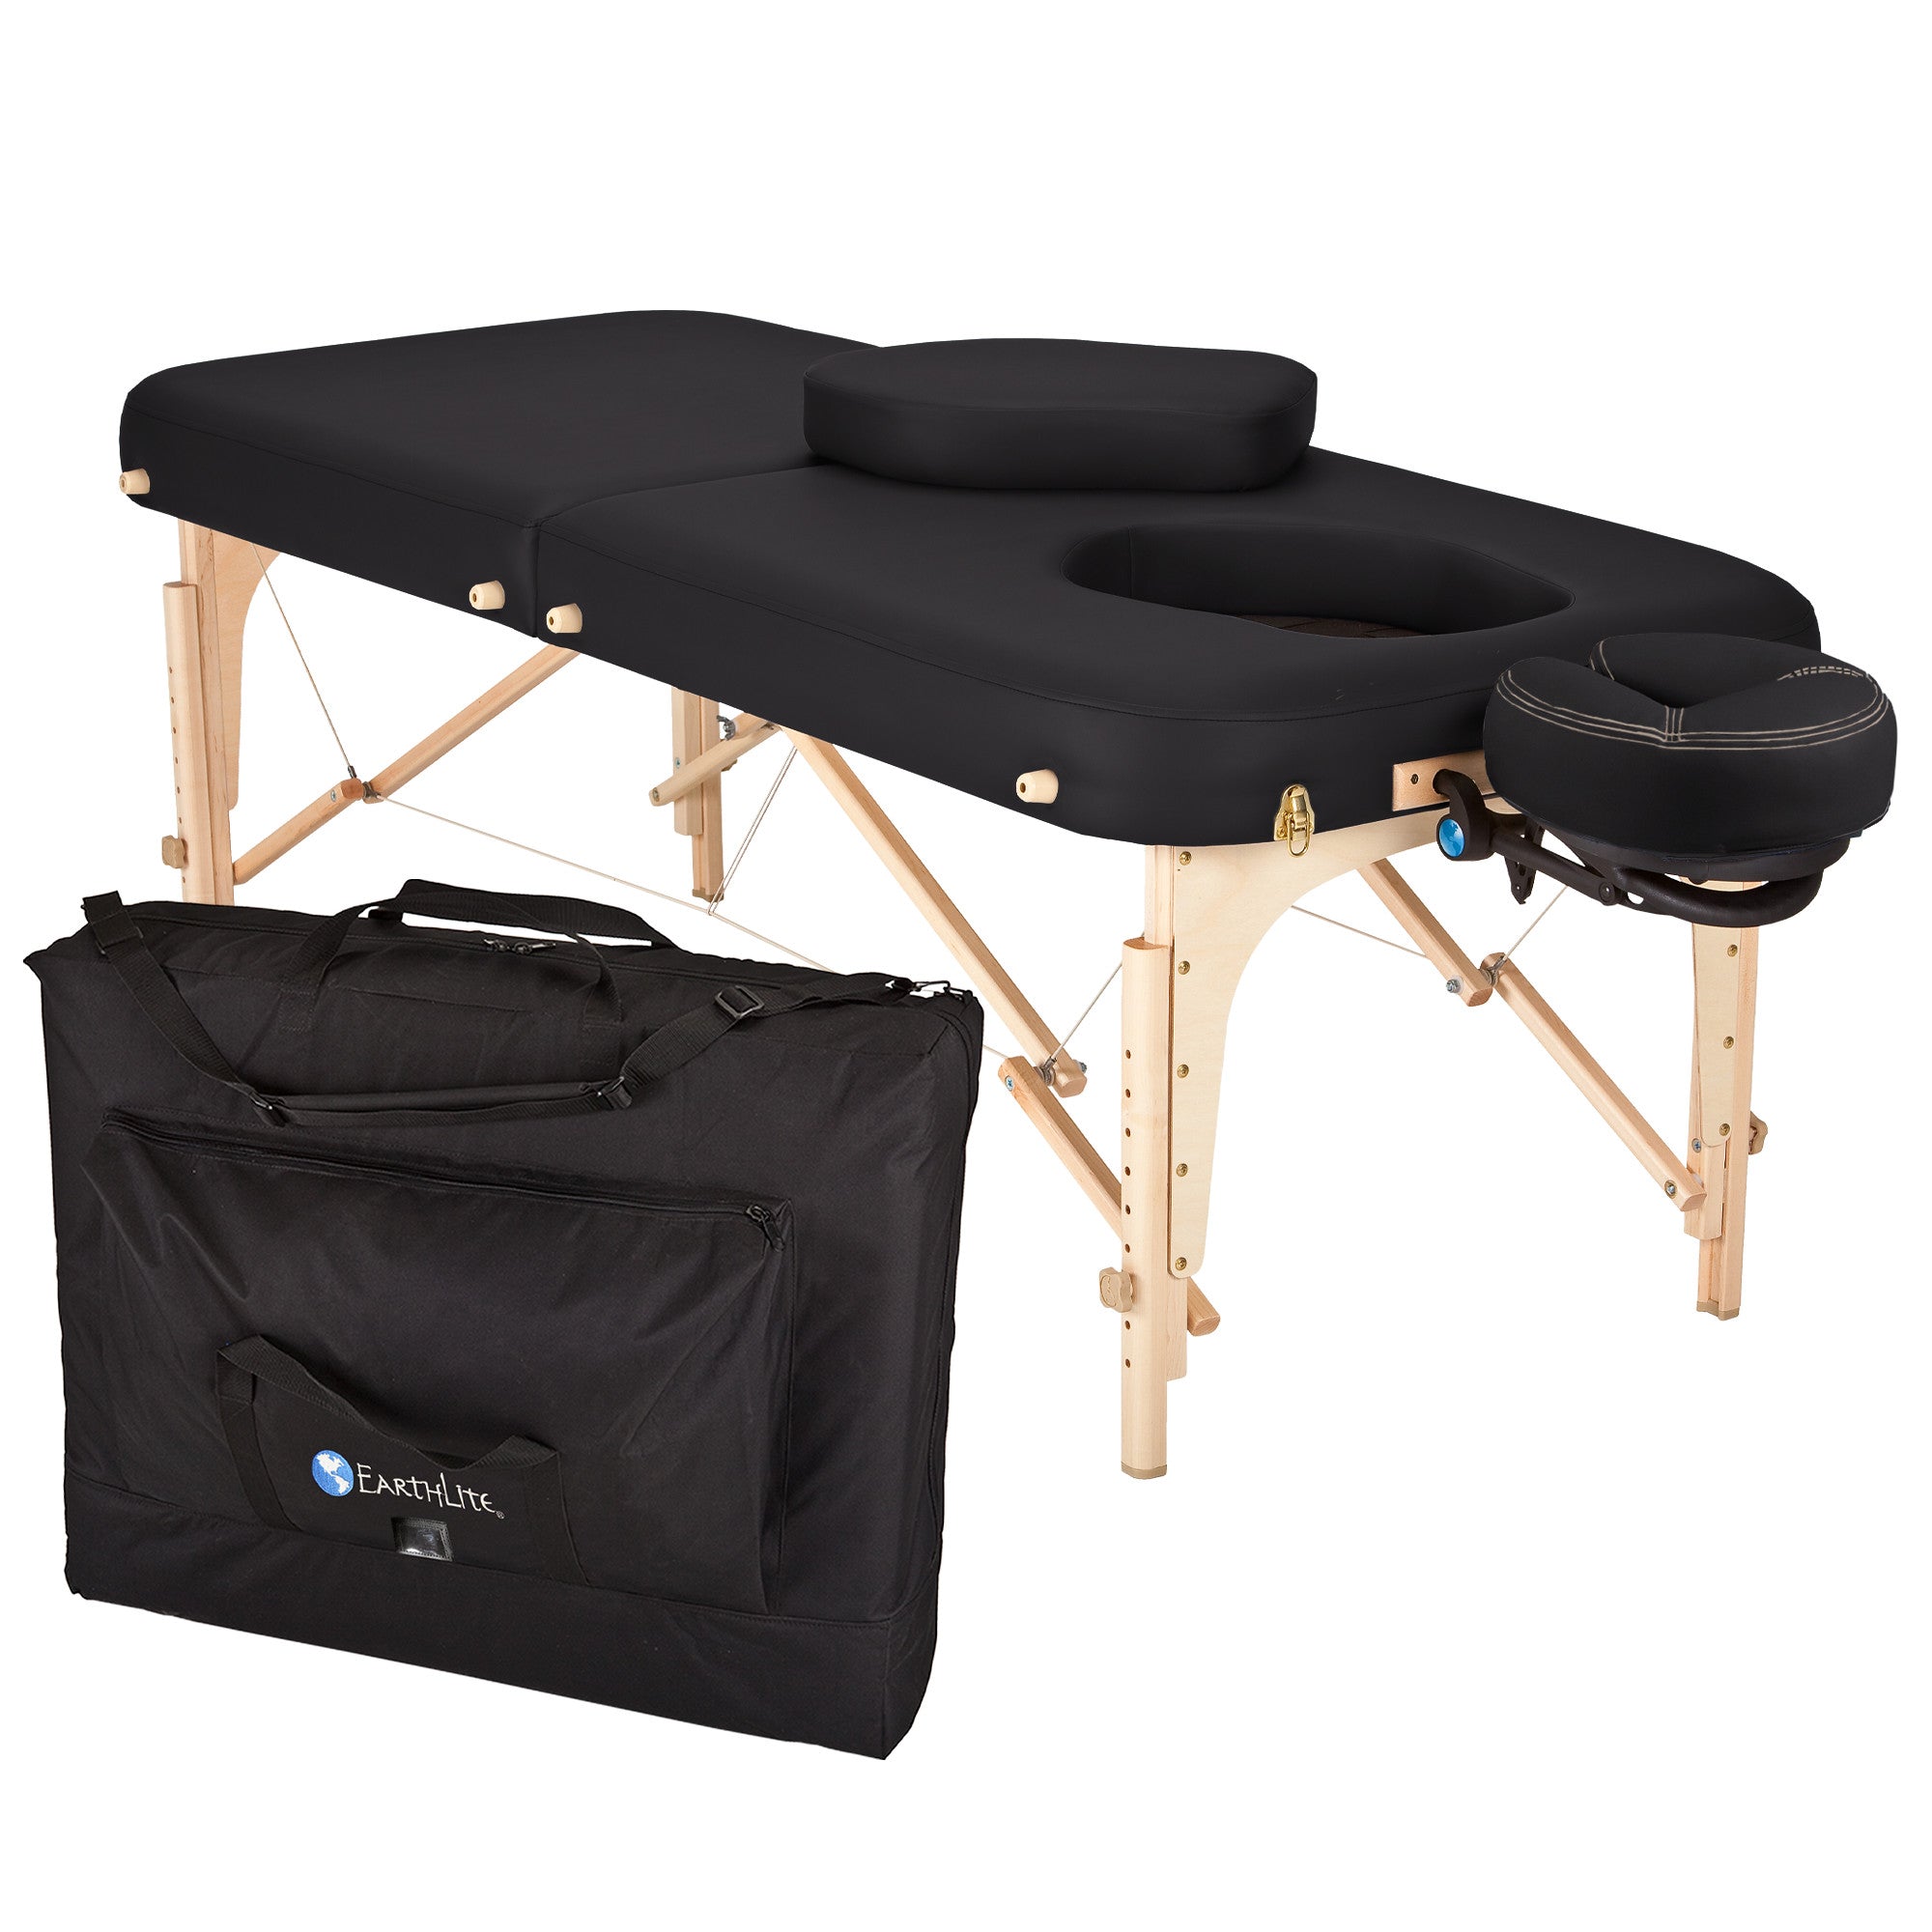 Tables: Portable Massage Office Tables